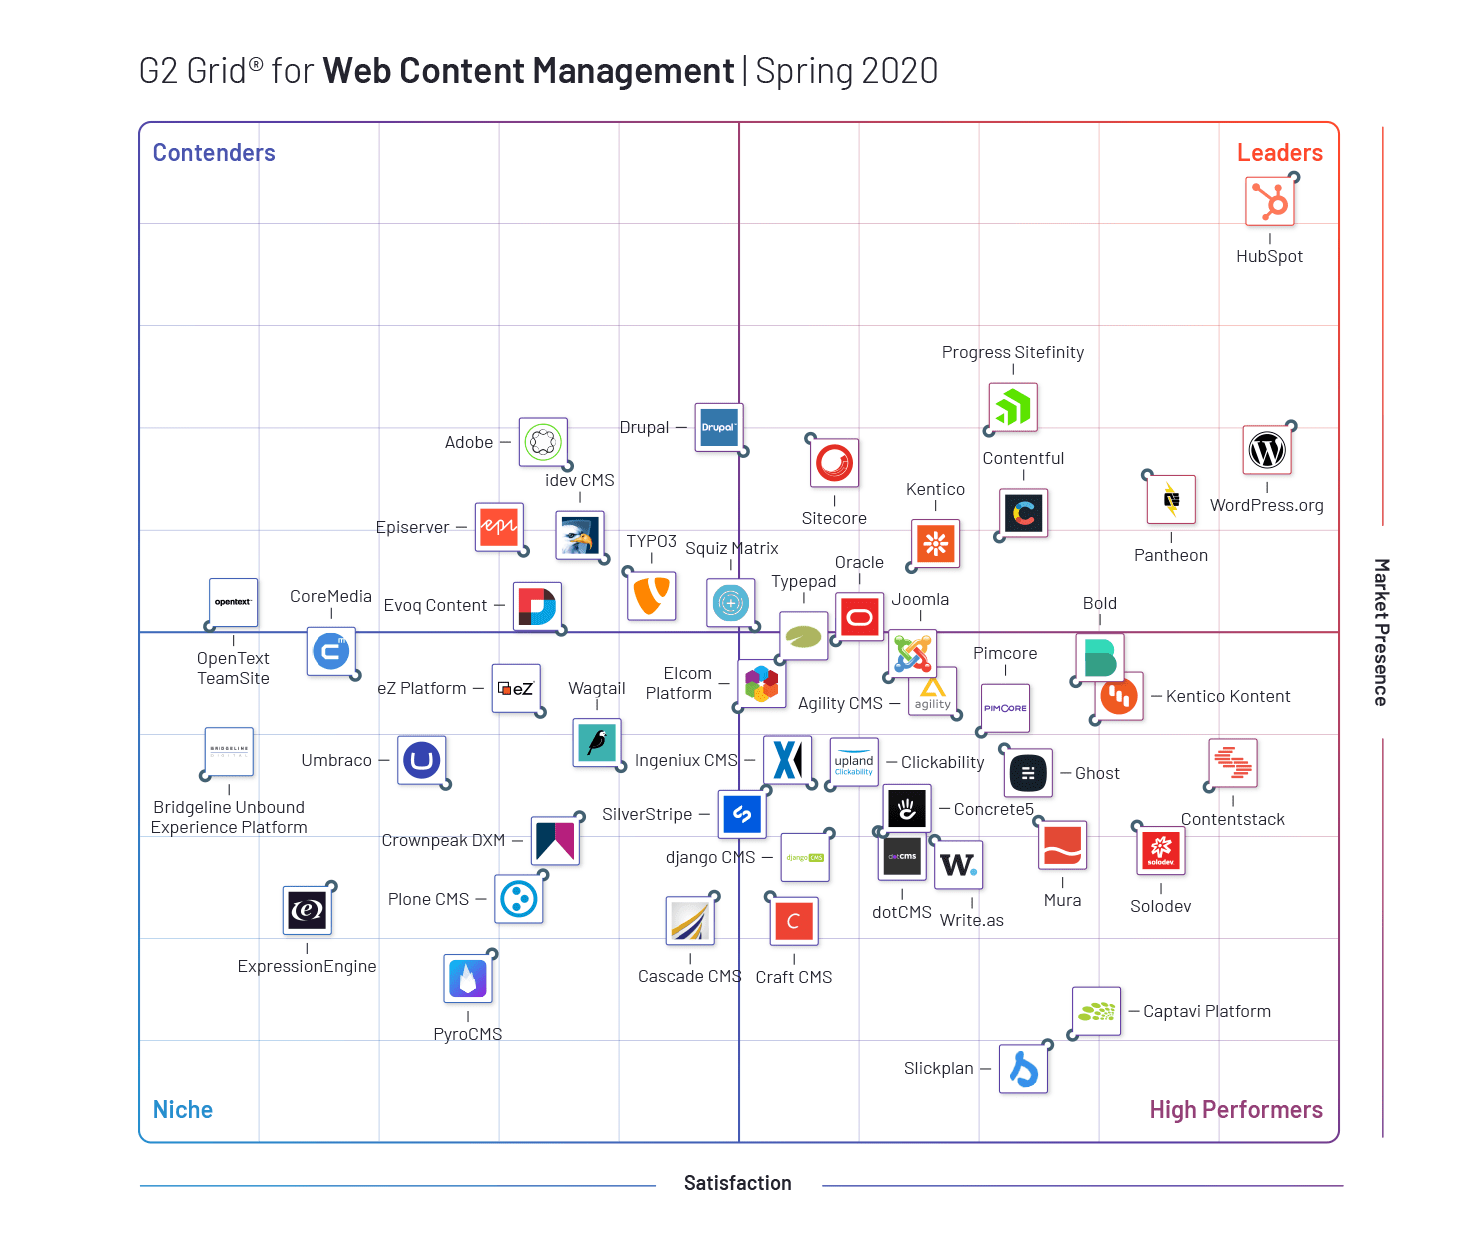 G2 Crowd Grid for Content Management Systems